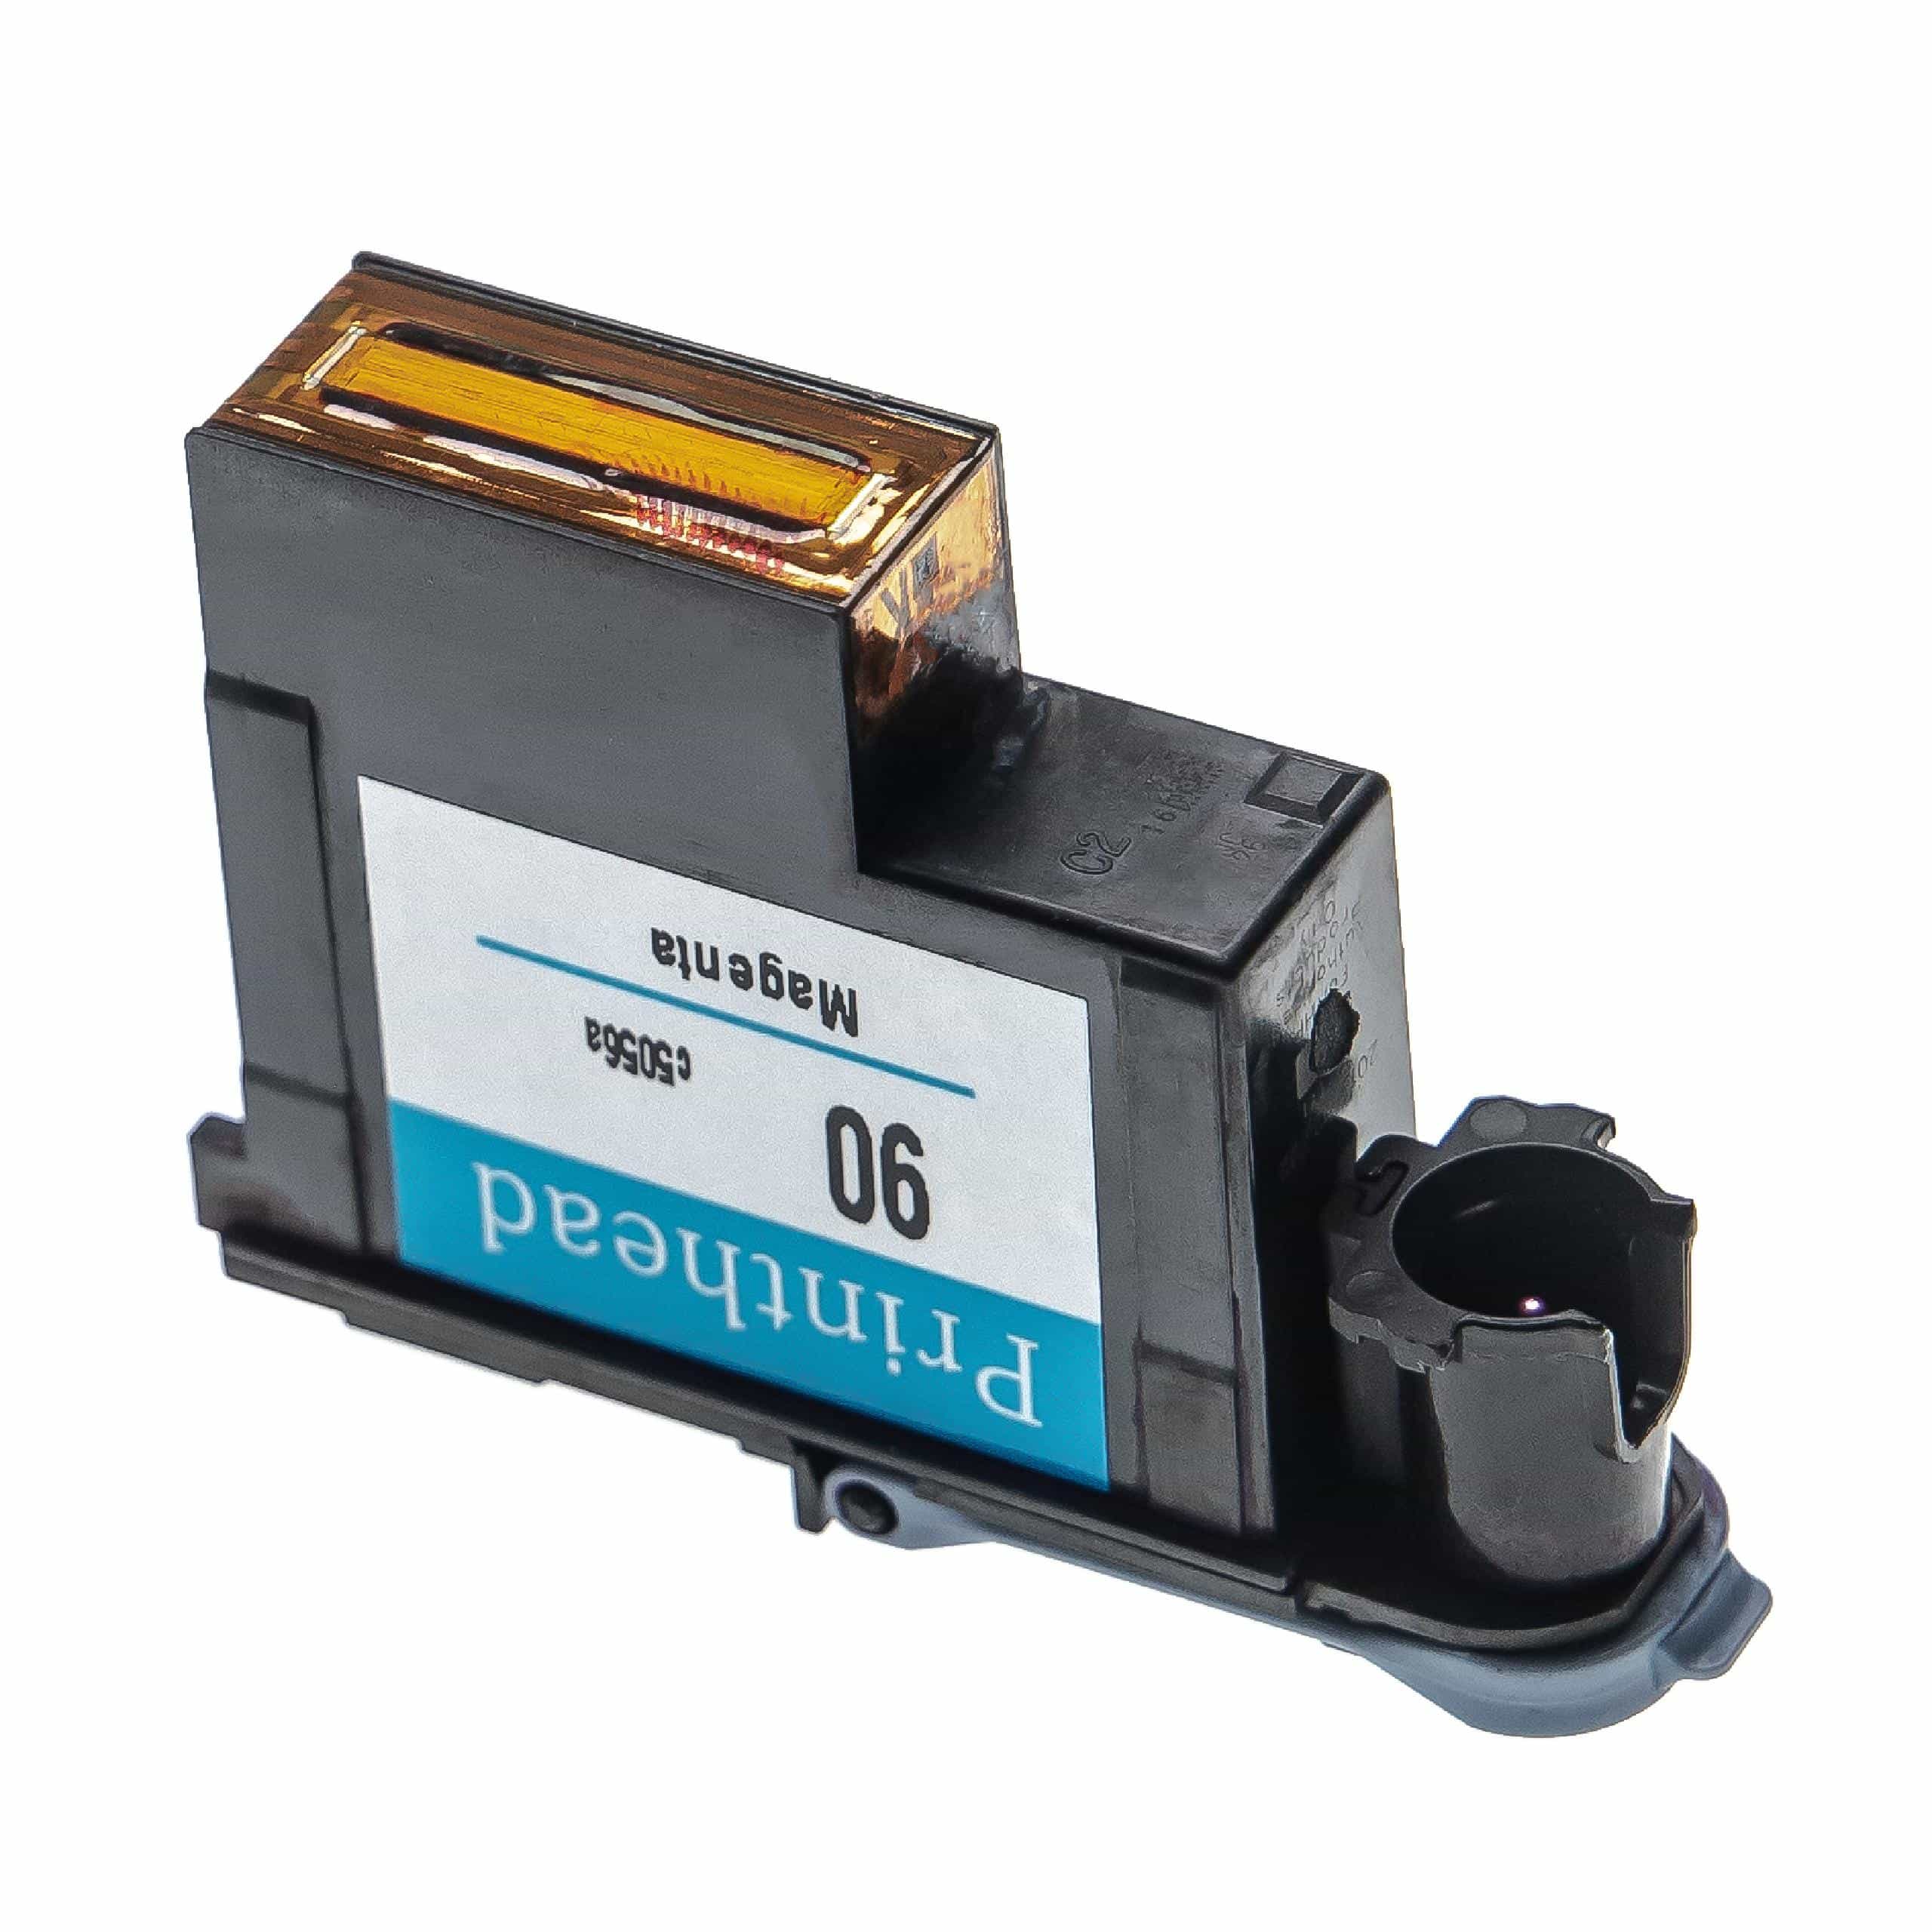 Printhead for HP DesignJet HP C5056A Printer - magenta, 6 cm wide, Refurbished, With Cleaner